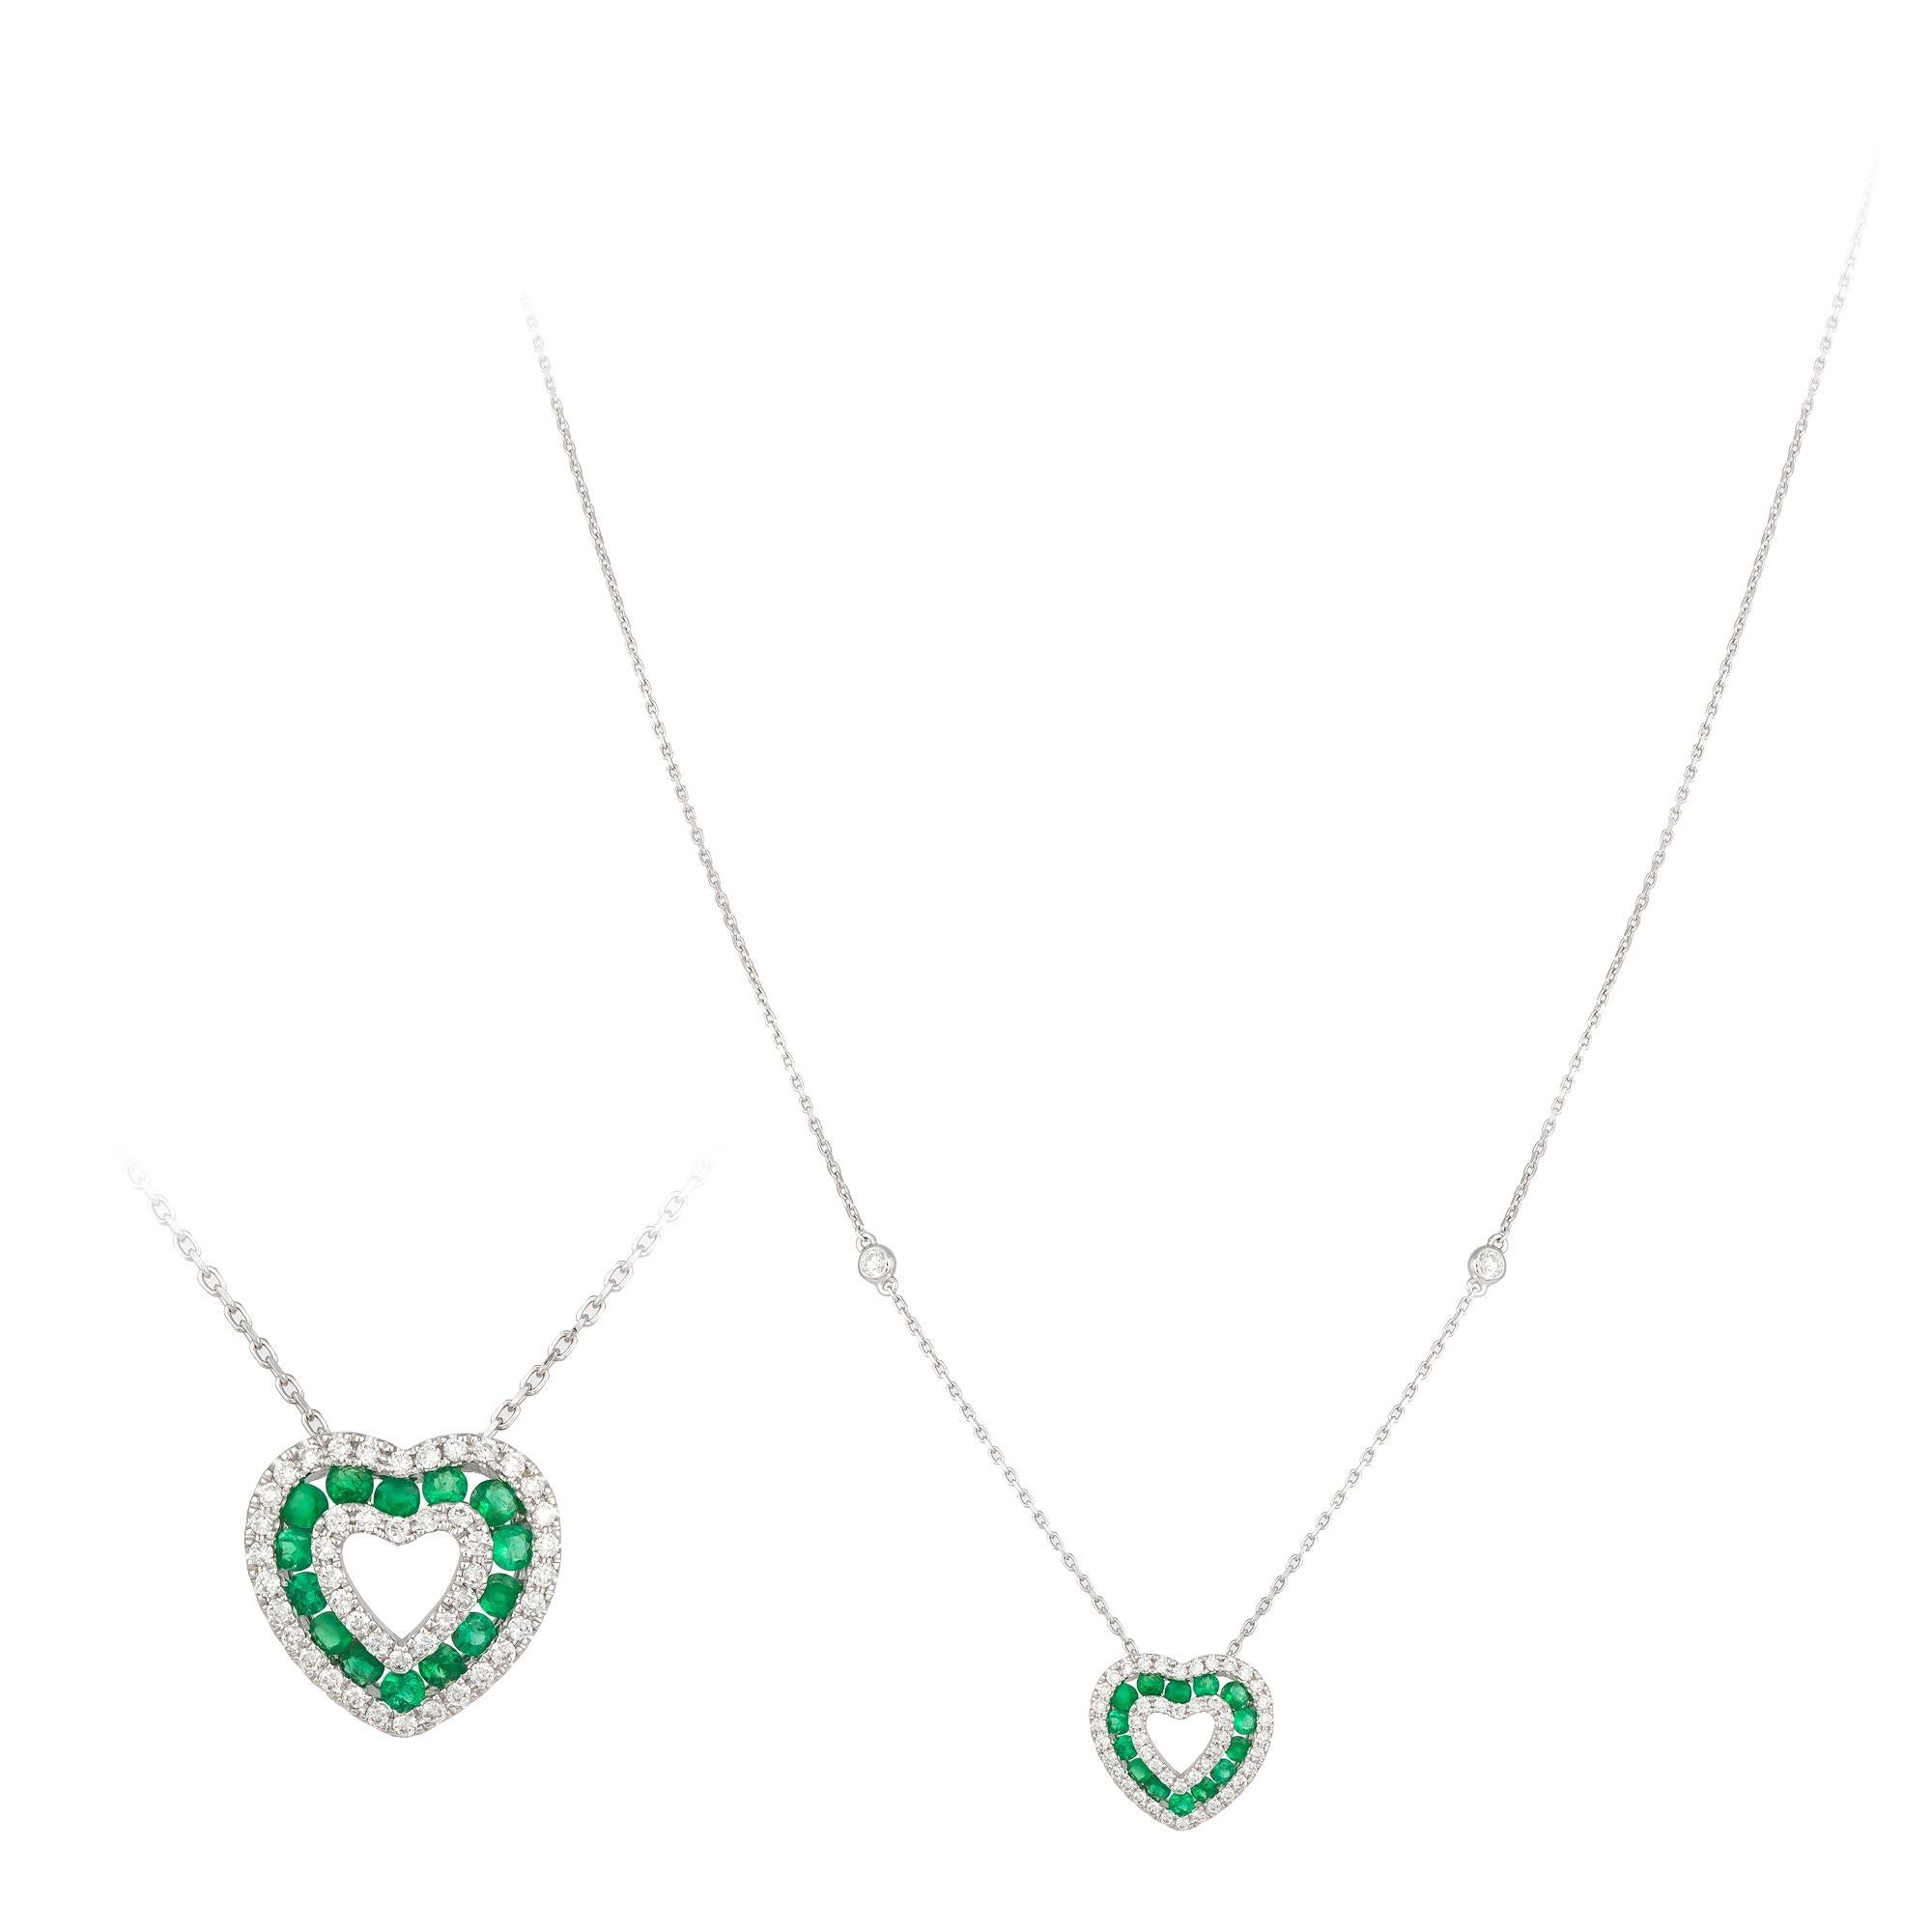 NECKLACE 18K White Gold 
Diamond 0.34 Cts/48 Pcs 
Emerald 0.43 Cts/14 Pcs

With a heritage of ancient fine Swiss jewelry traditions, NATKINA is a Geneva based jewellery brand, which creates modern jewellery masterpieces suitable for every day